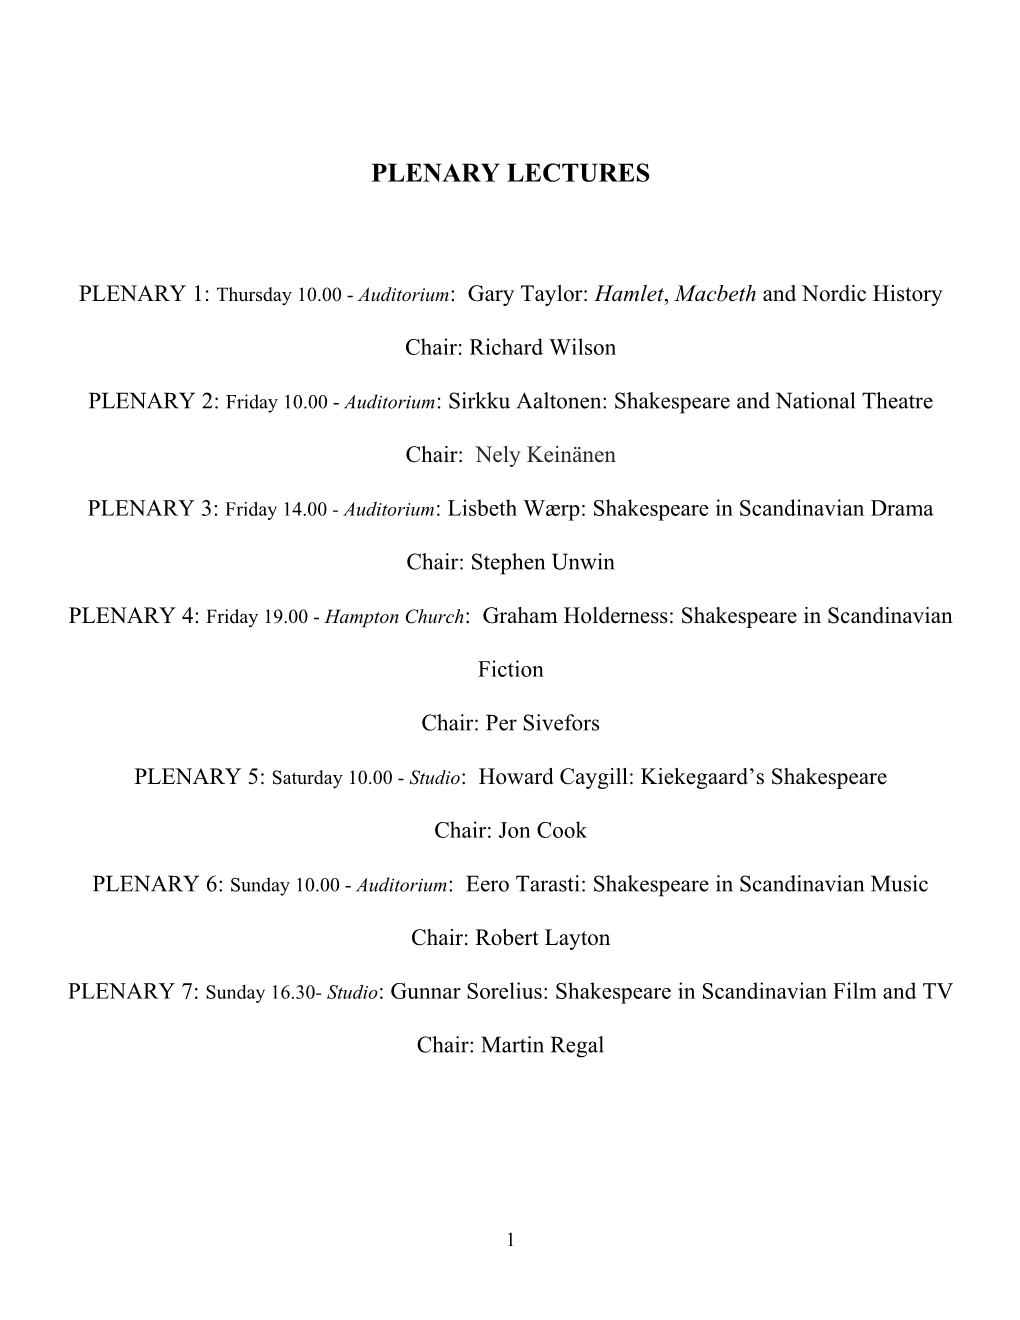 Plenary Lectures